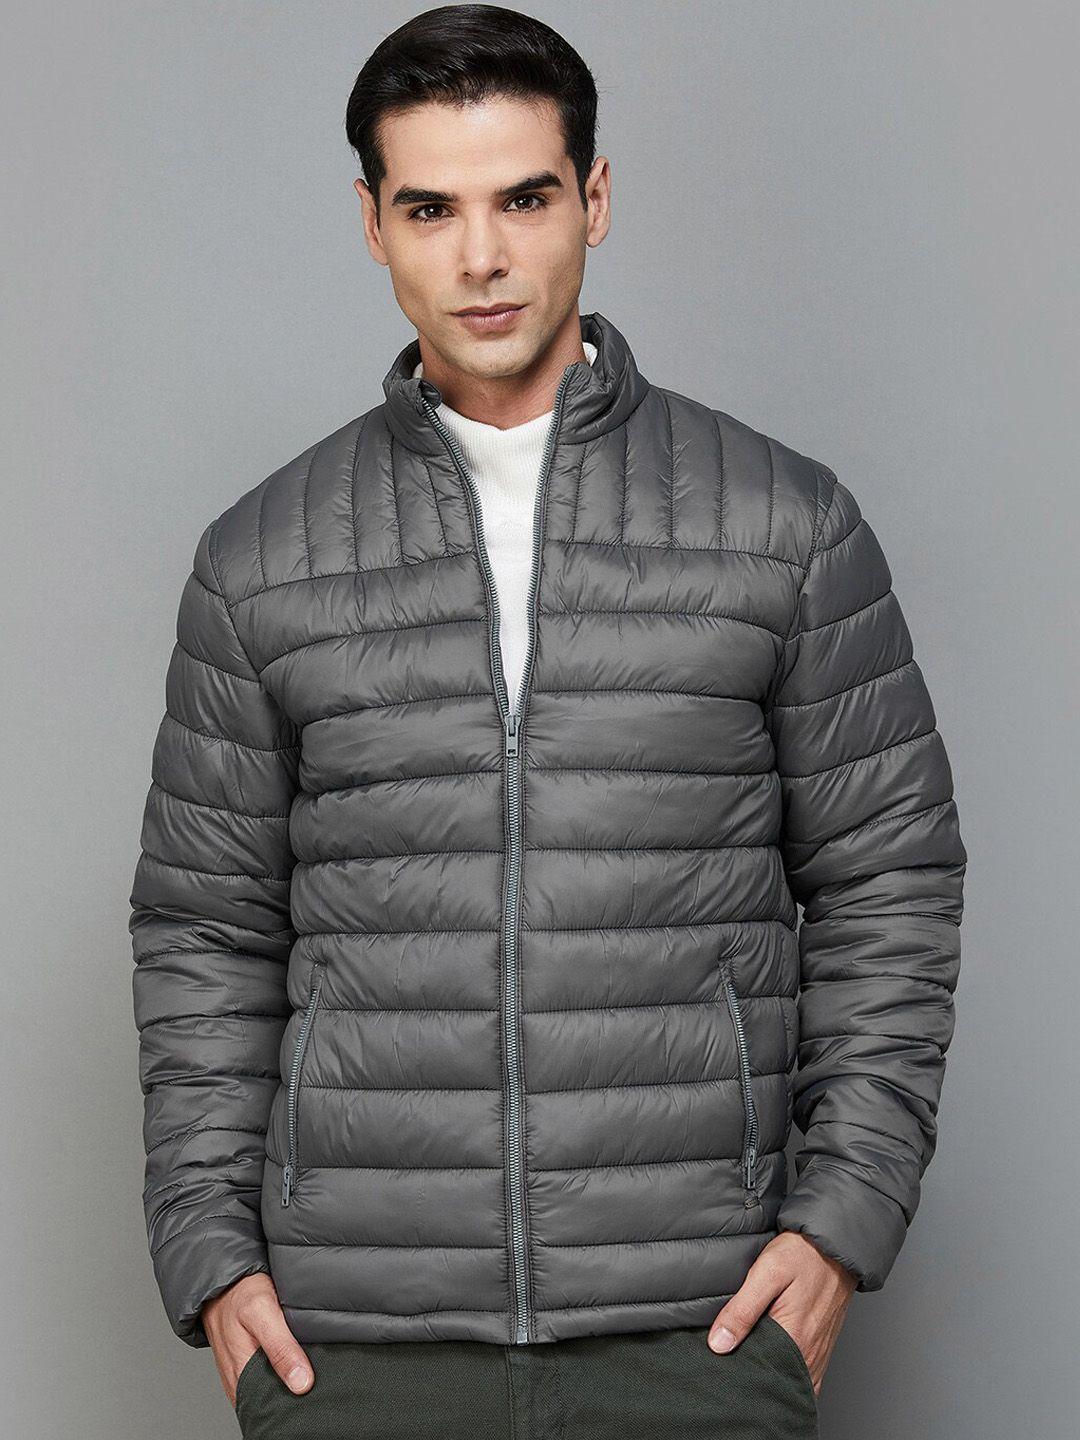 code-by-lifestyle-mock-collar-puffer-jacket